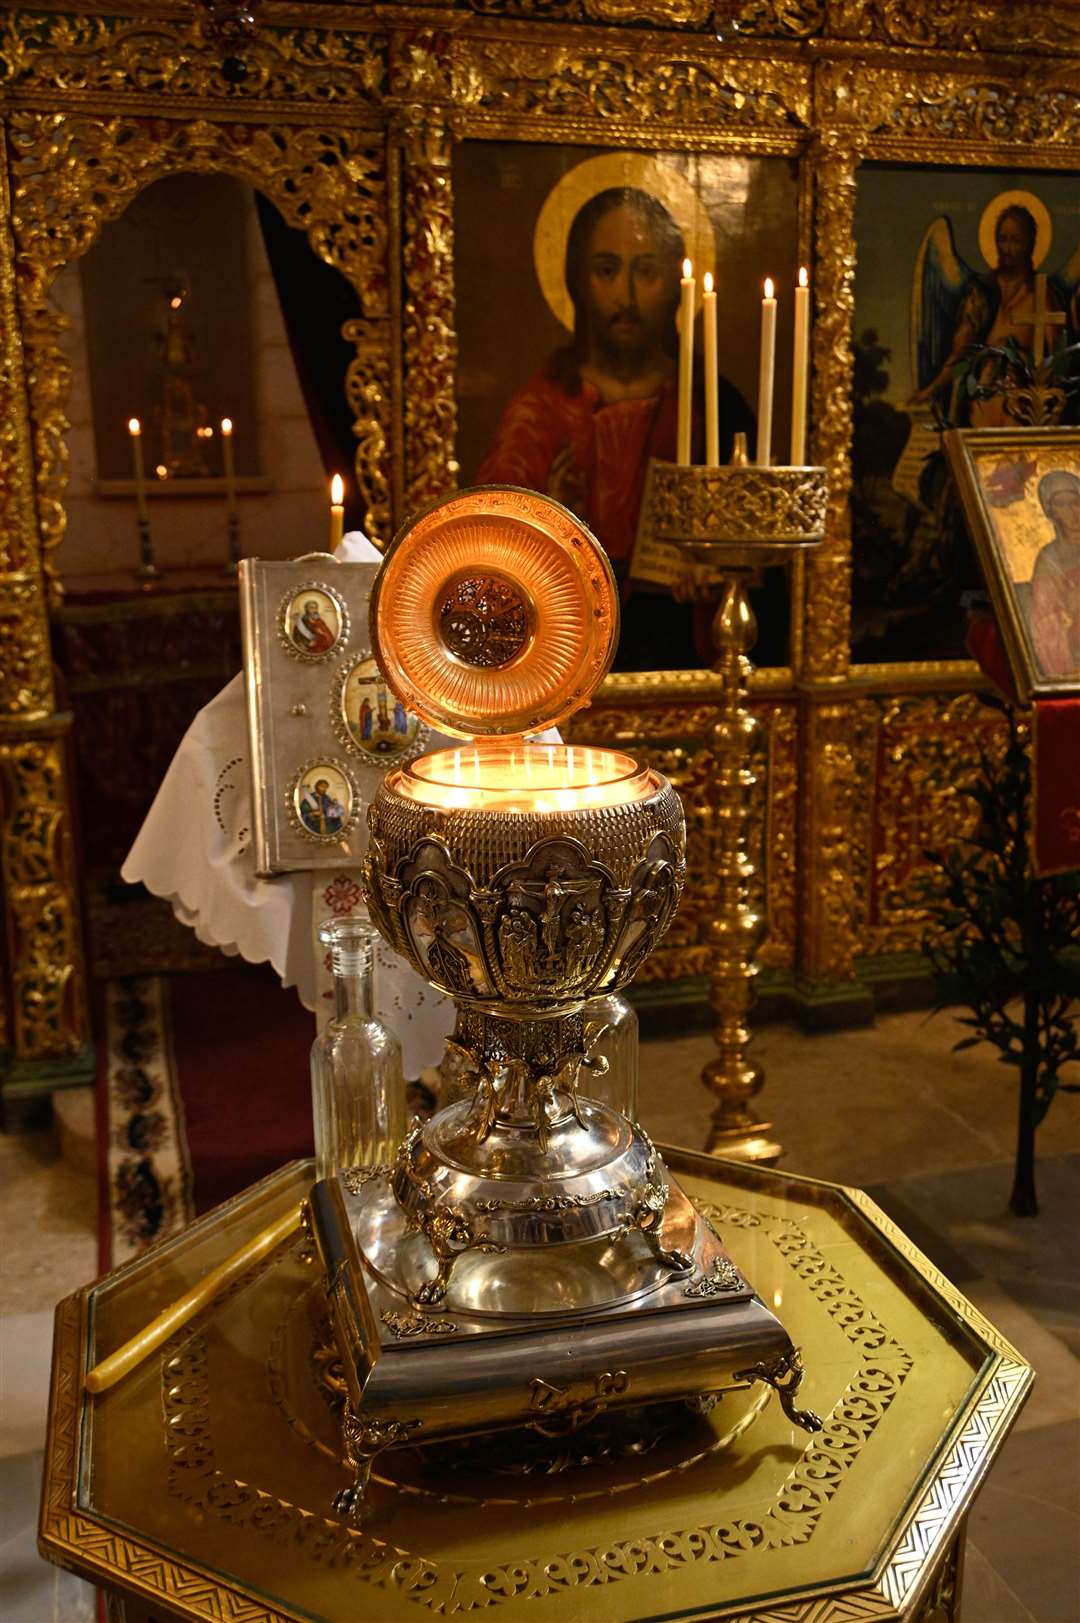 Oils from the Mount of Olives were mixed with essential oils and blessed in Jerusalem before being used in the King’s coronation (Patriarchate of Jerusalem/Buckingham Palace/PA)